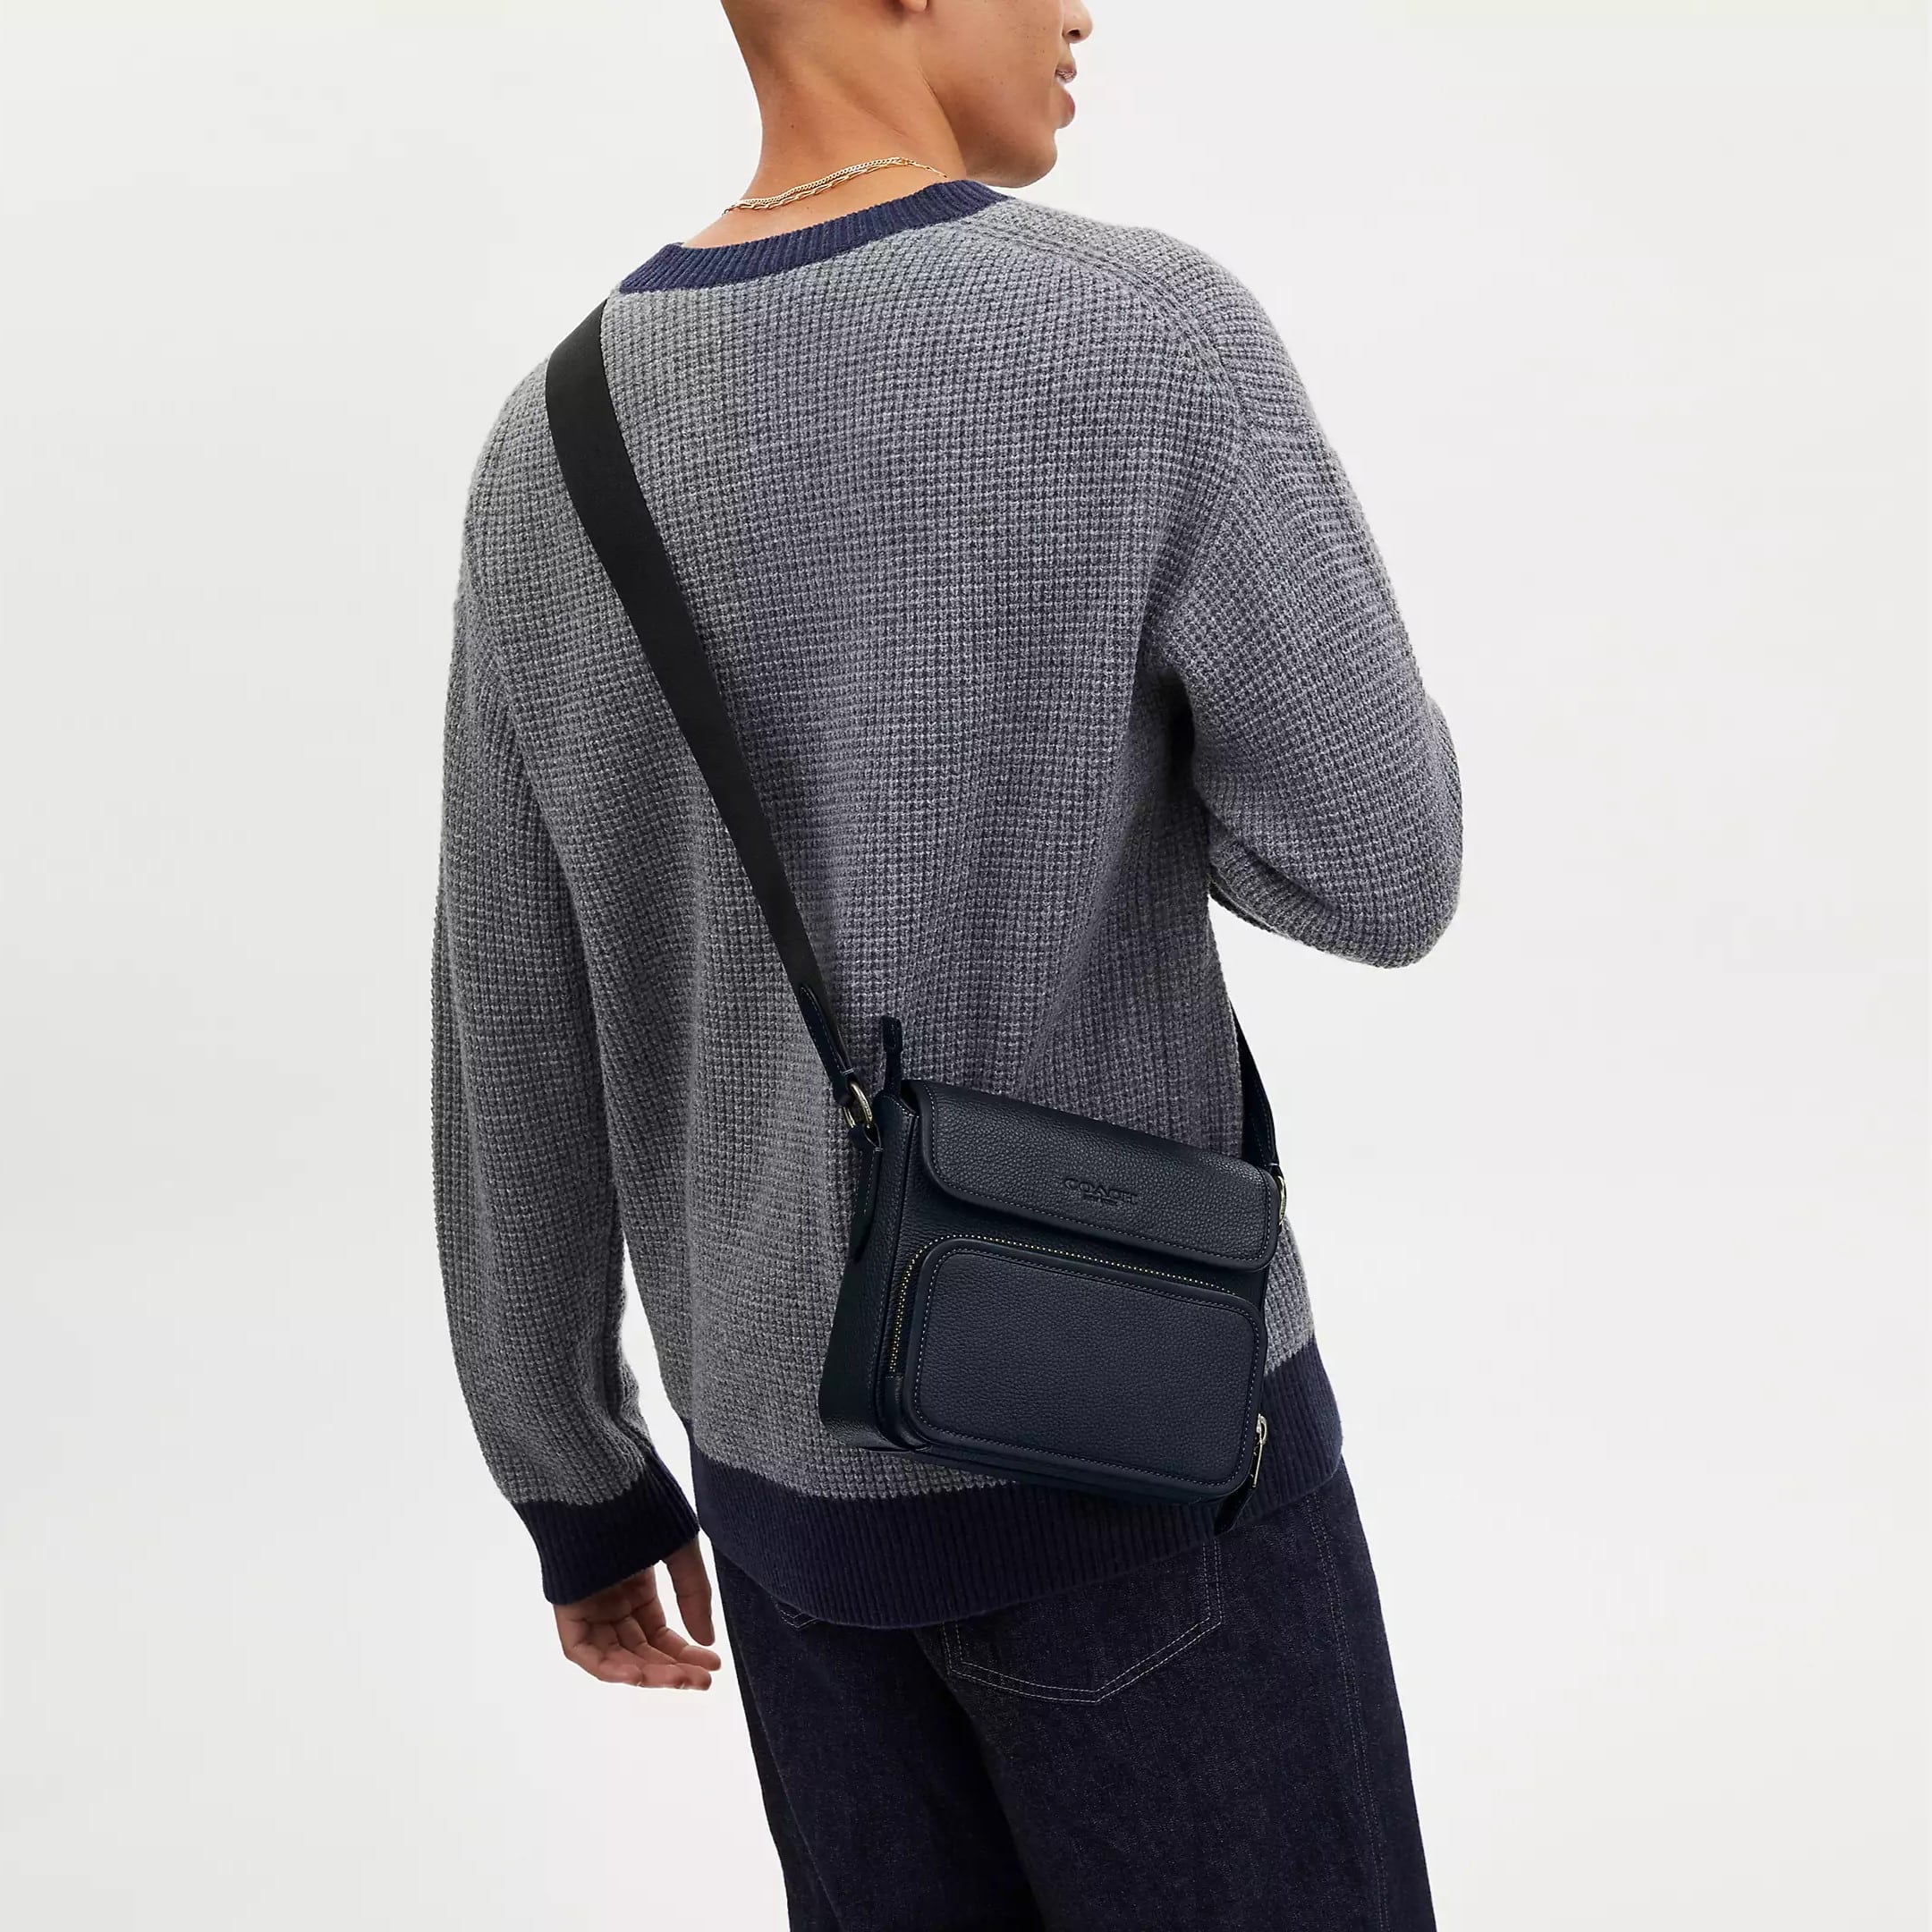 TÚI ĐEO CHÉO COACH NAM SULLIVAN FLAP CROSSBODY IN MIDNIGHT NAVY REFINED PEBBLE LEATHER AND SMOOTH CALF LEATHER CN729 1